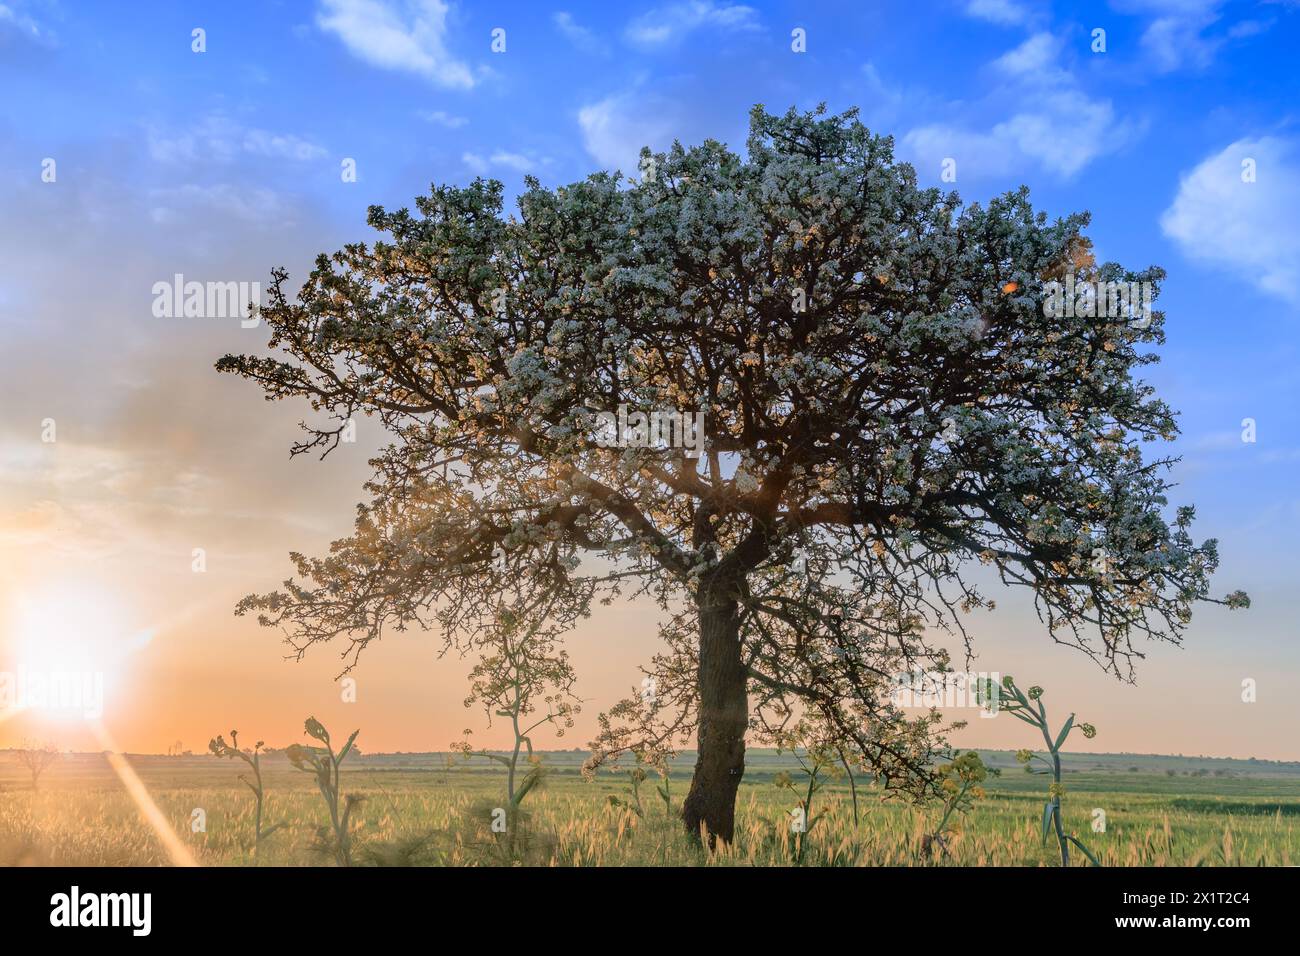 Alta Murgia National Park: wild almond tree in bloom at dawn in Apulia, Italy. Stock Photo